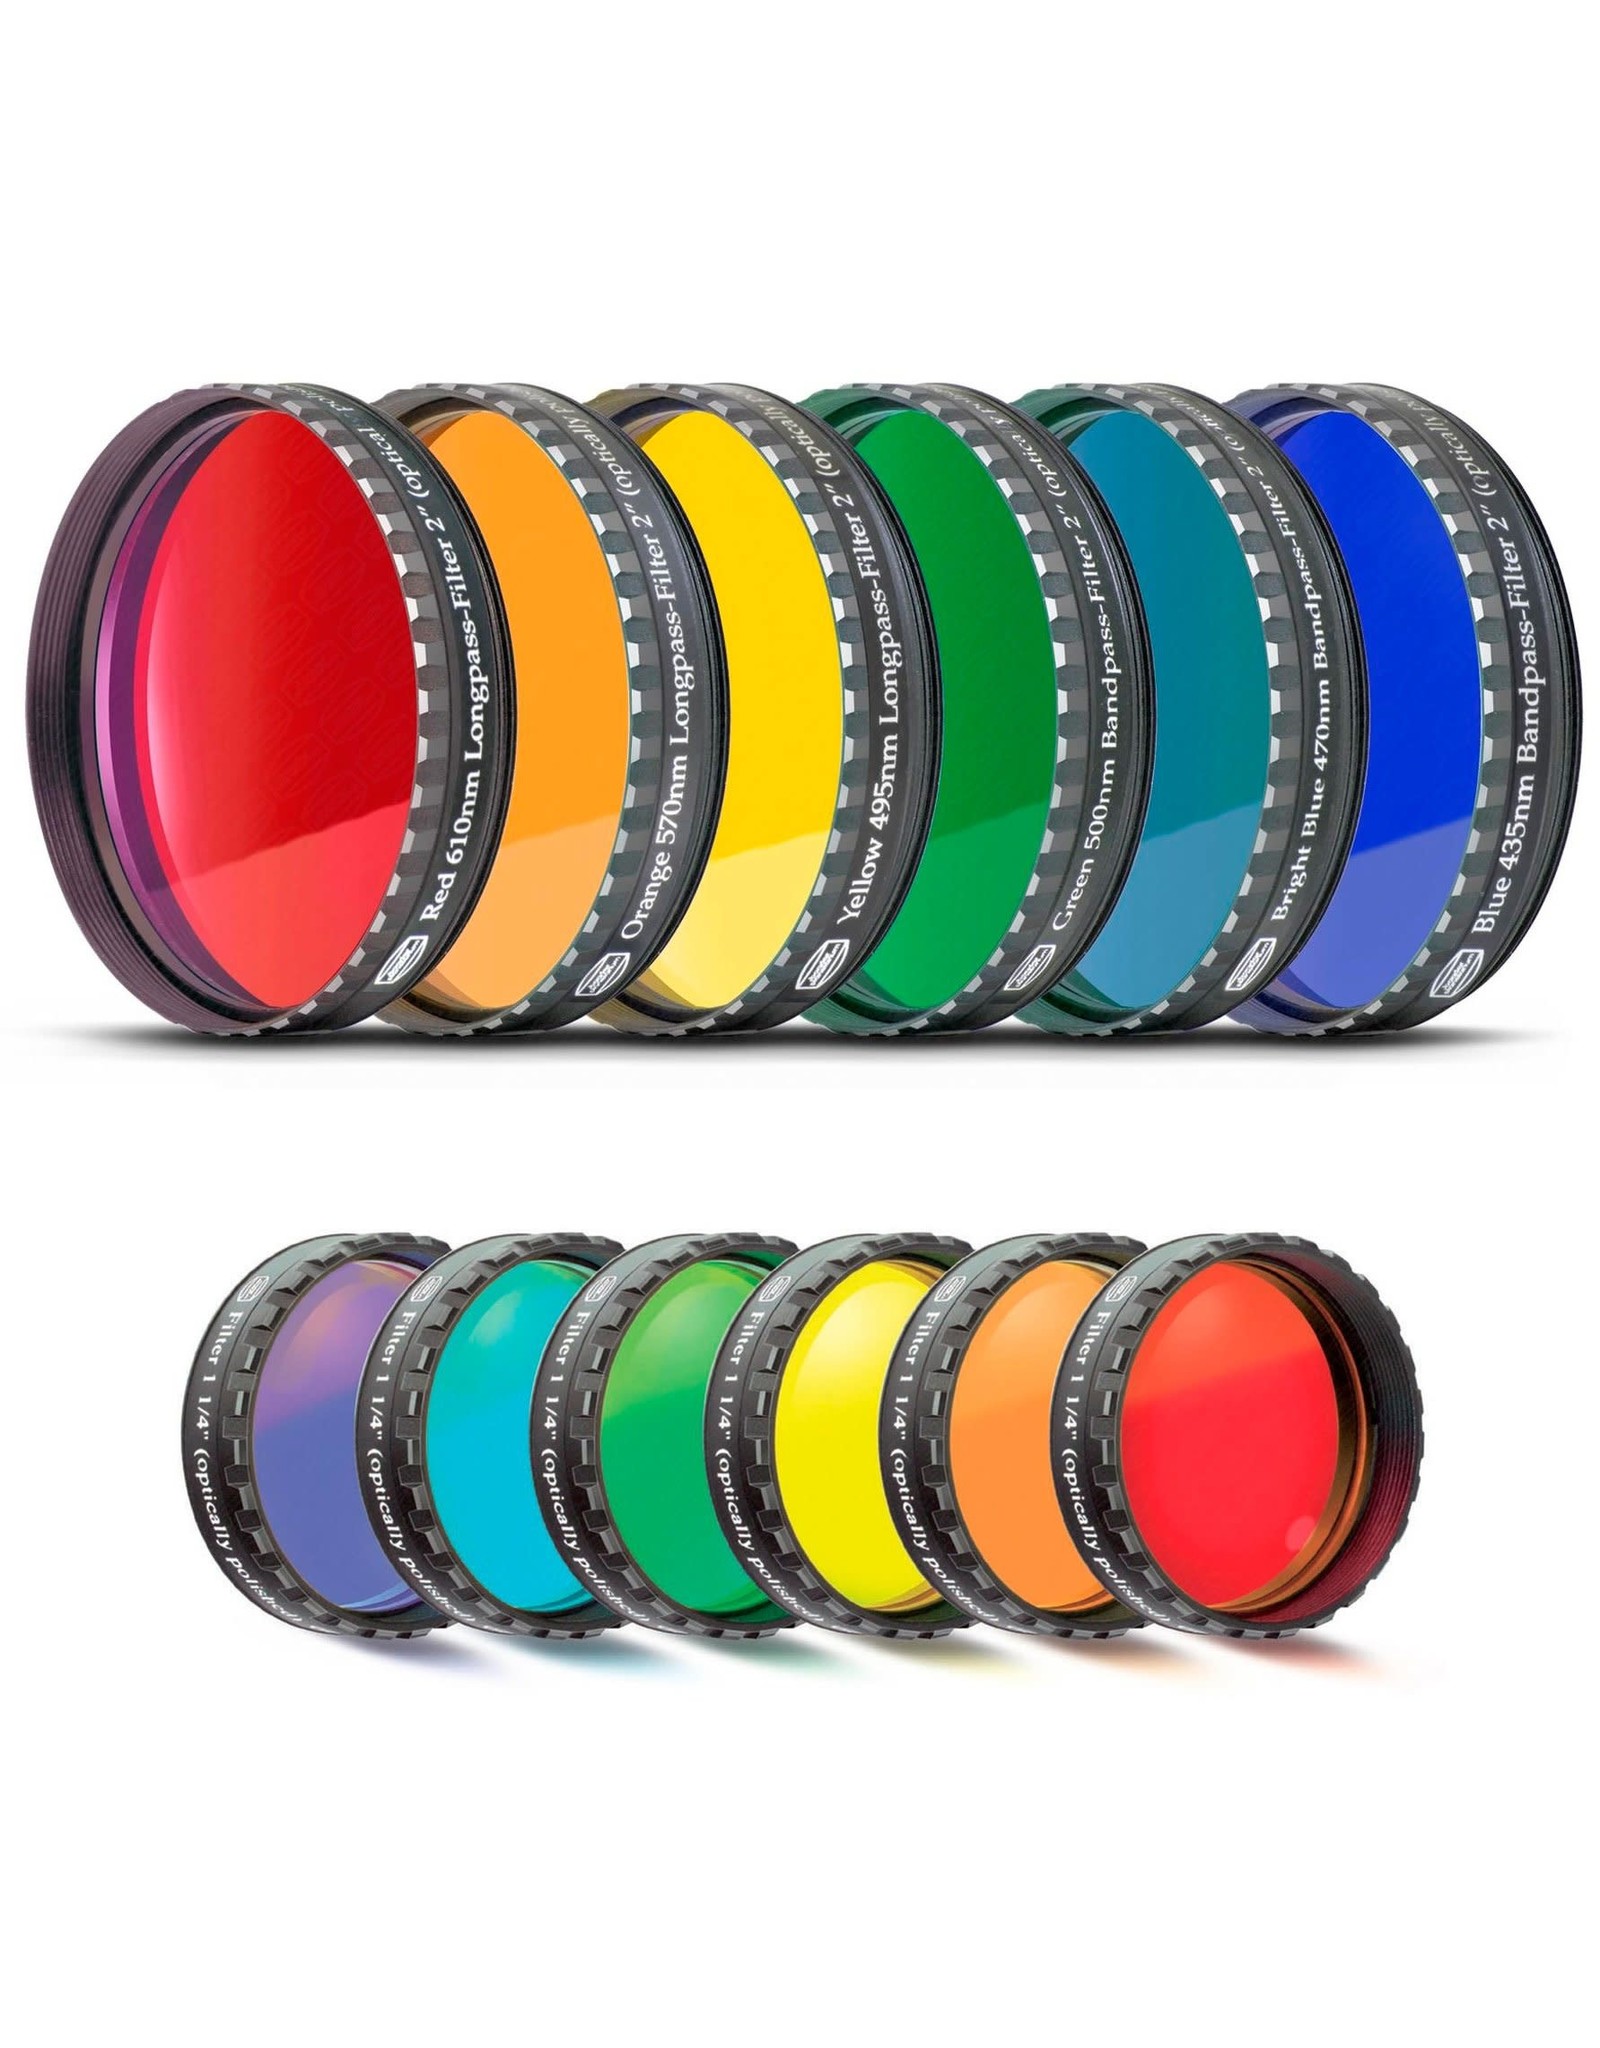 Baader Planetarium Baader Color Filter-Set Moon and Planetary (6 colors) (Specify Size)